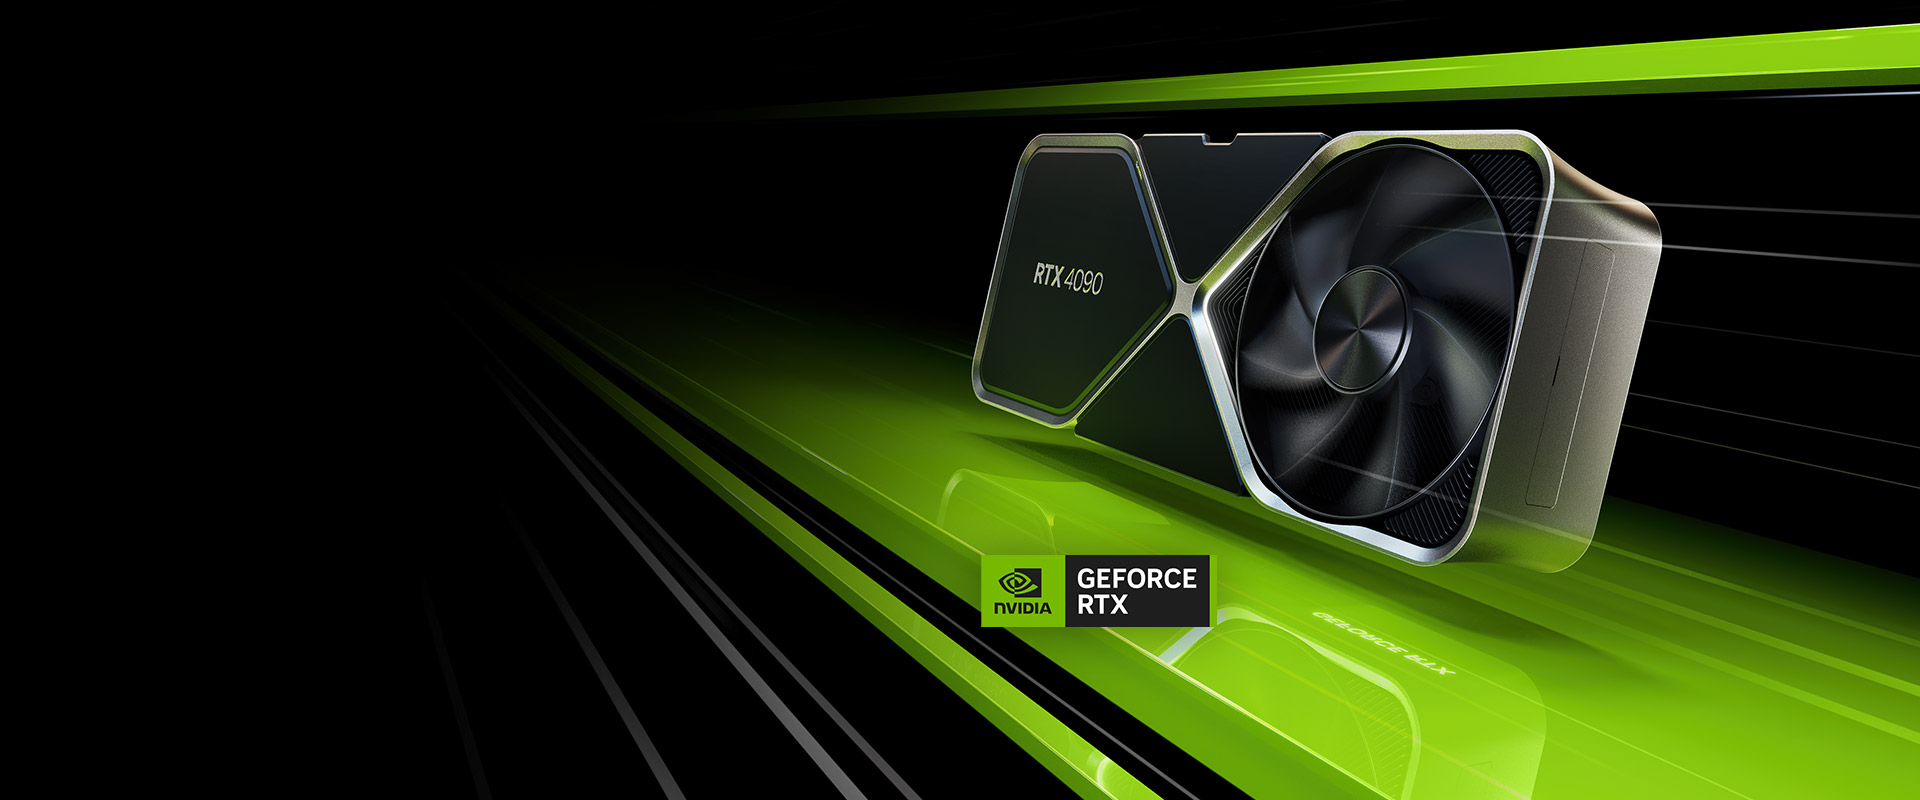 New NVIDIA GeForce RTX 4080 Graphics Card Available now at ORIGIN PC